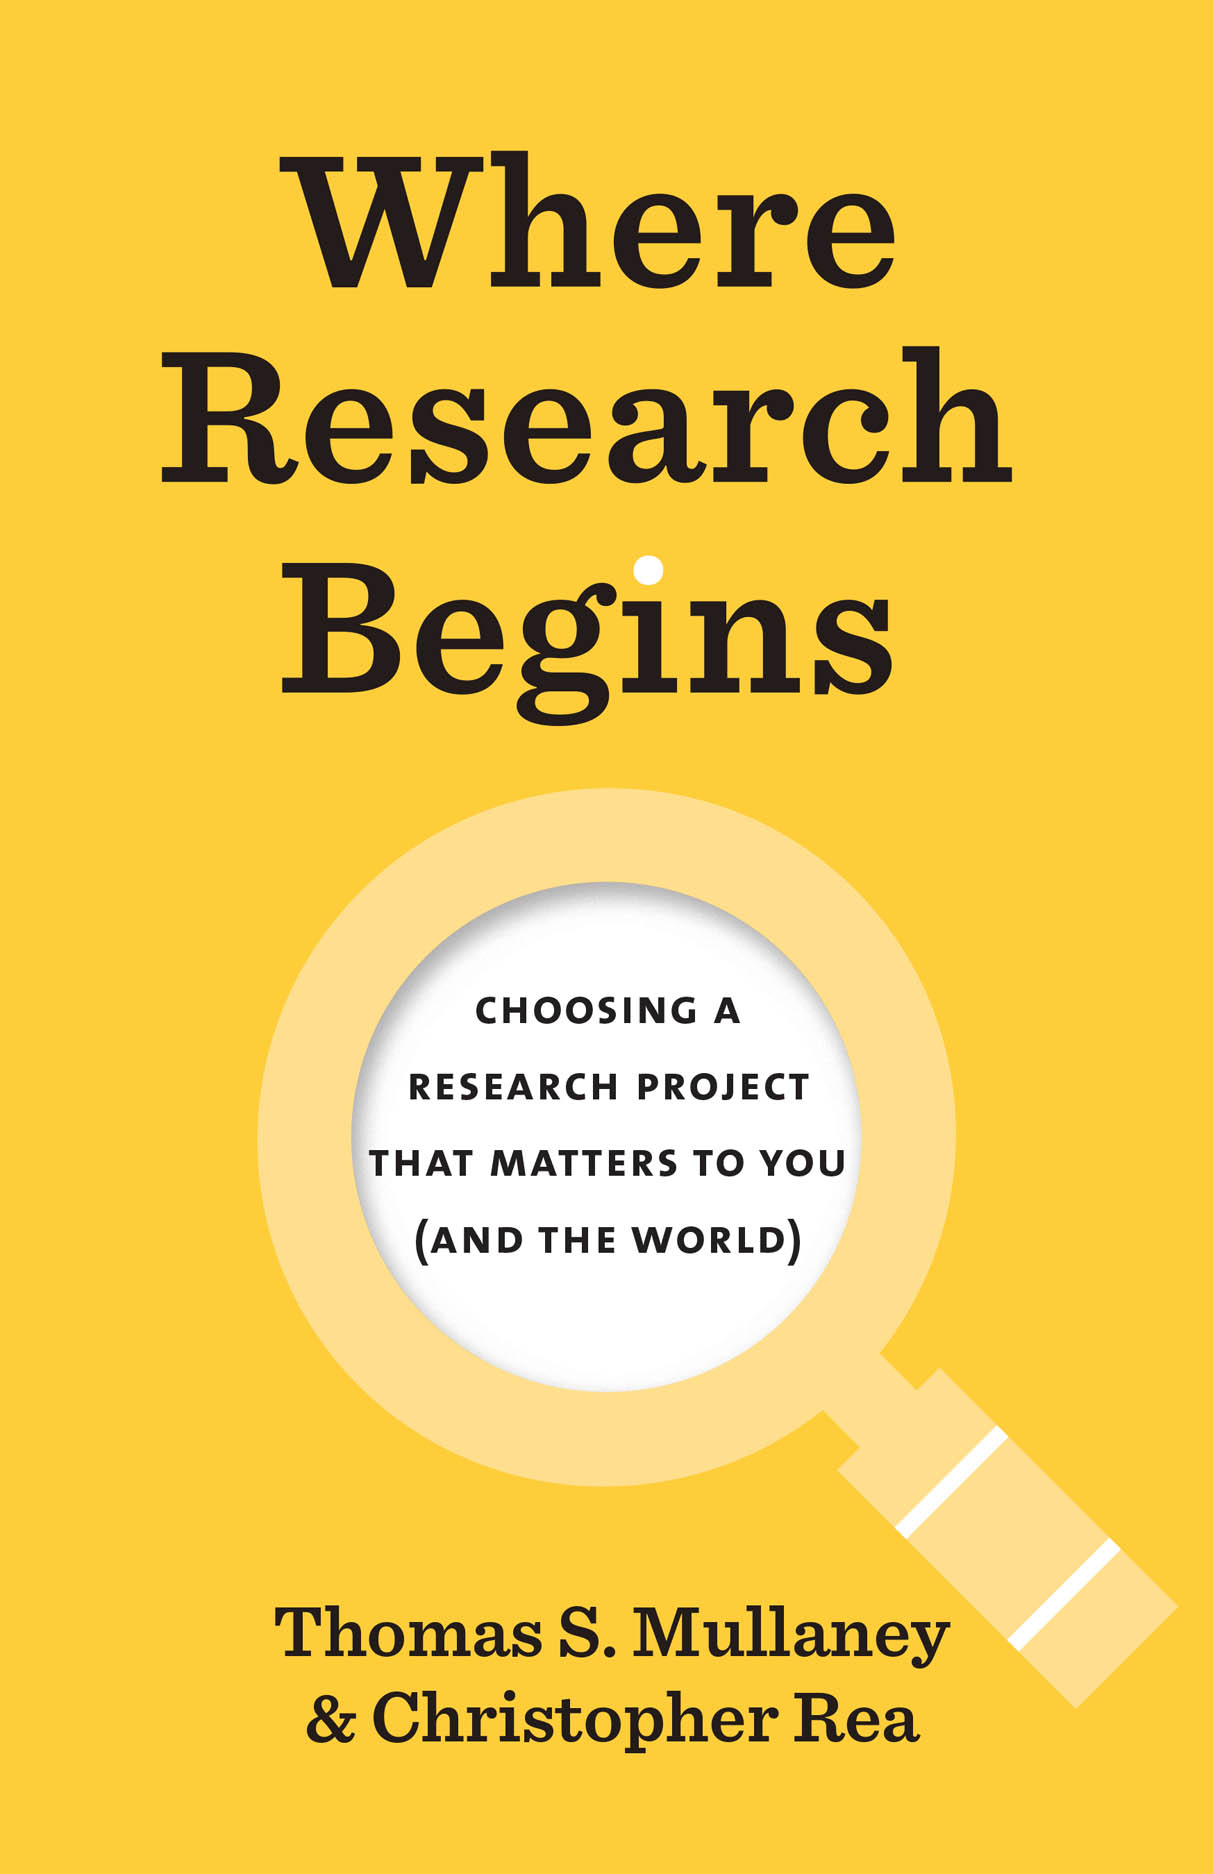 Where Research Begins: Choosing a Research Project That Matters to